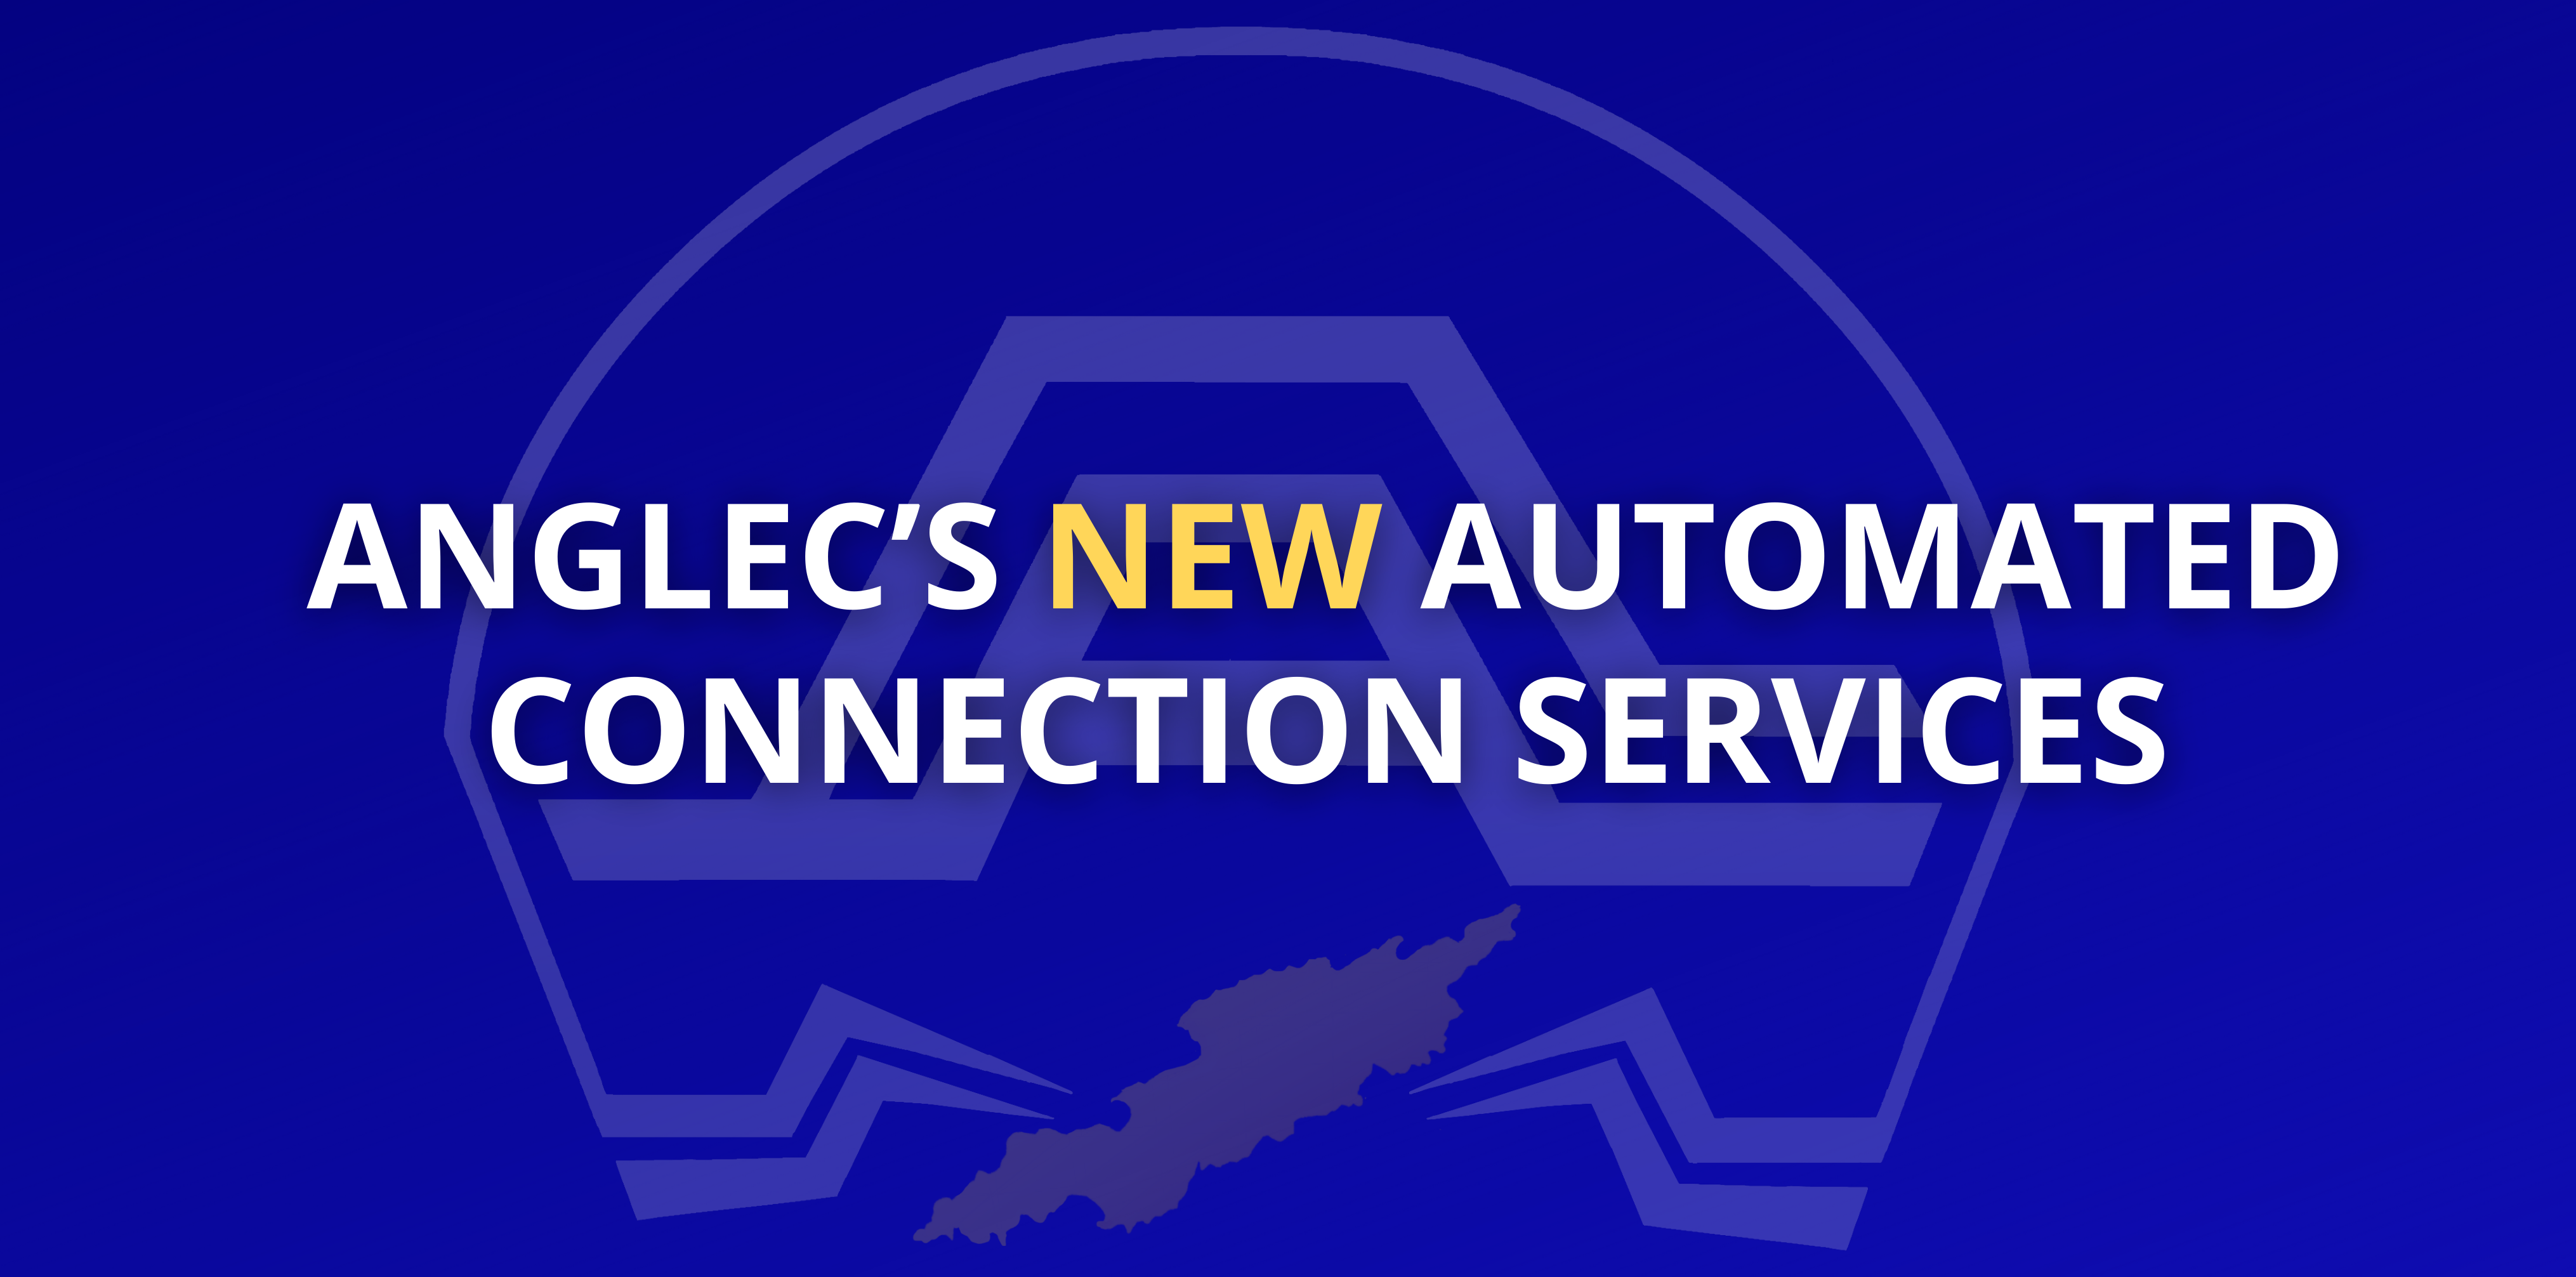 New Automated Connection Services